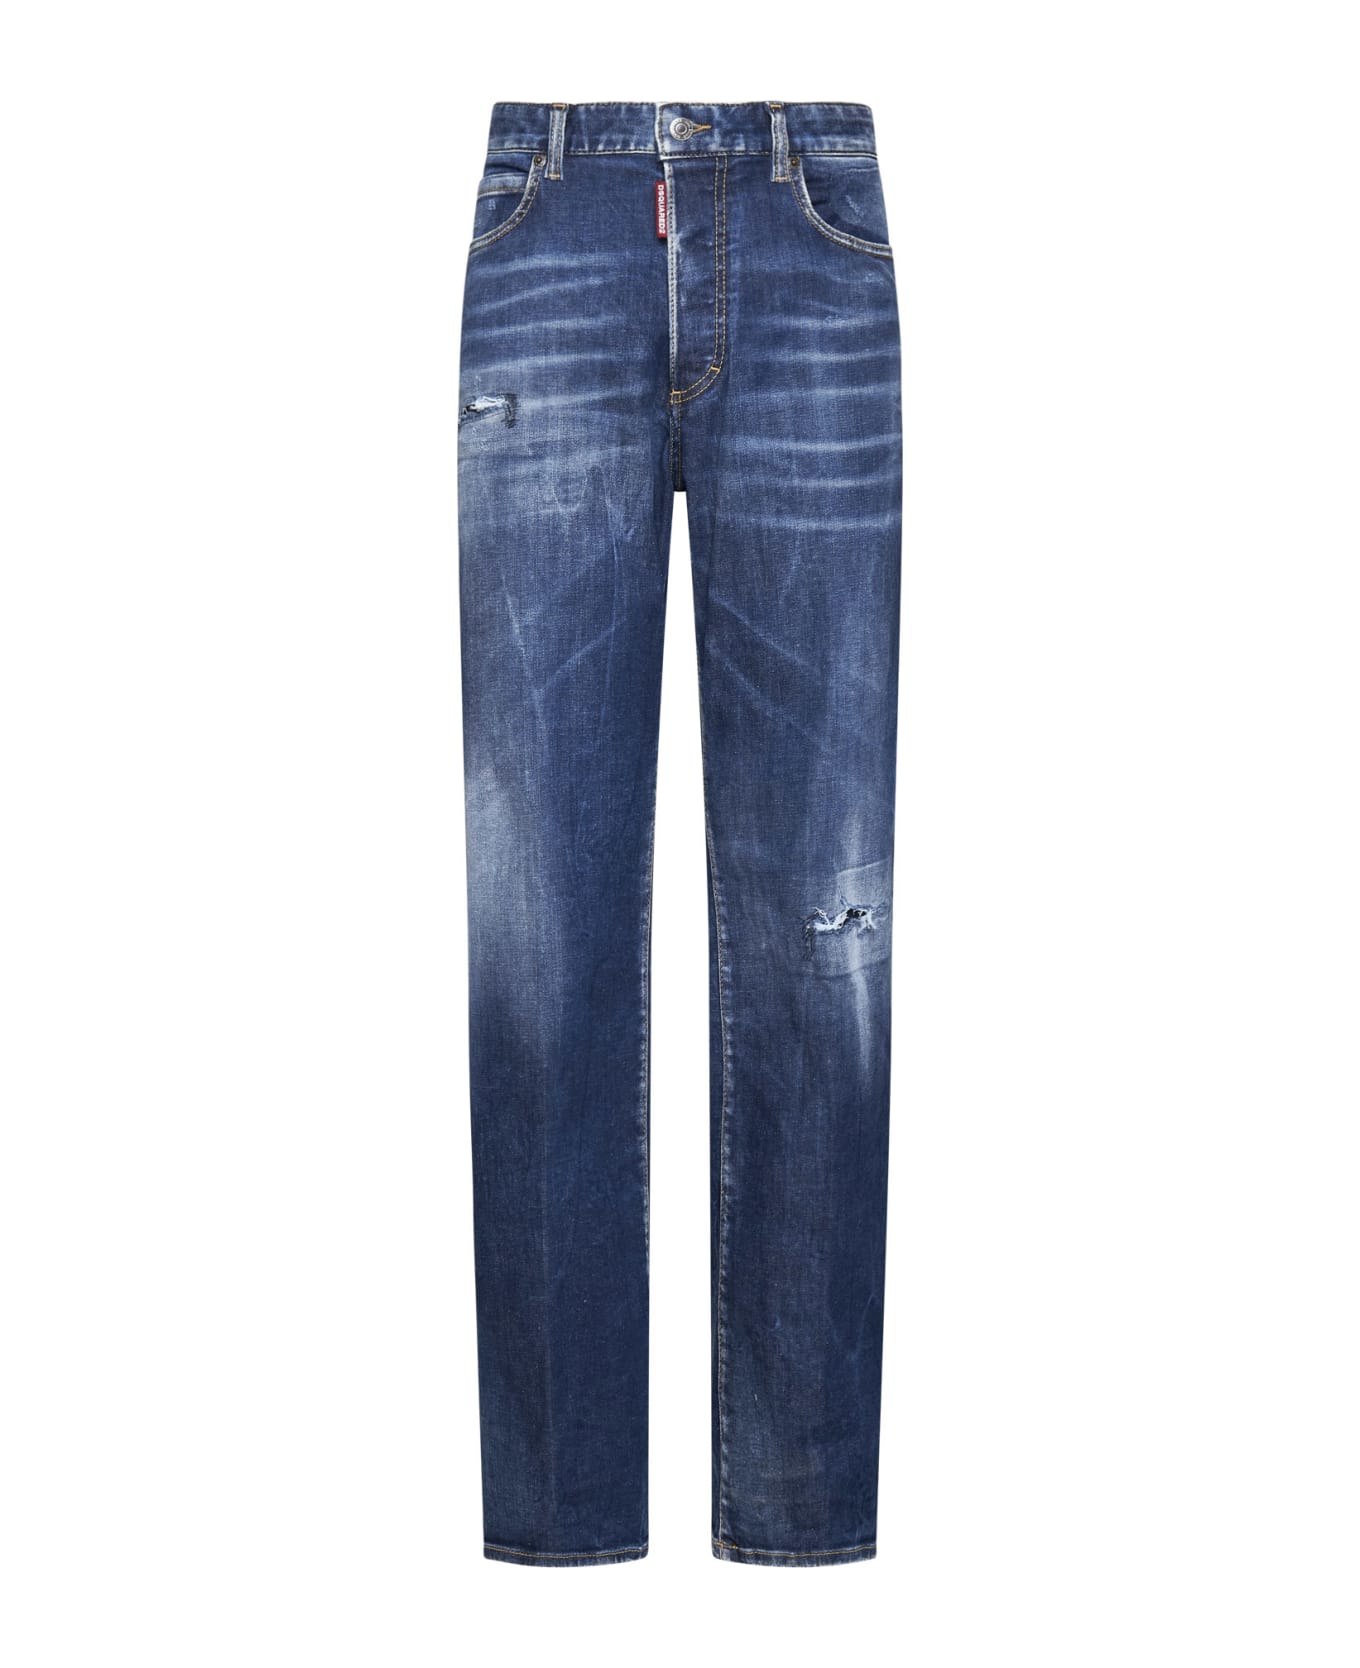 Dsquared2 Icon San Diego Jeans - Navy blue デニム